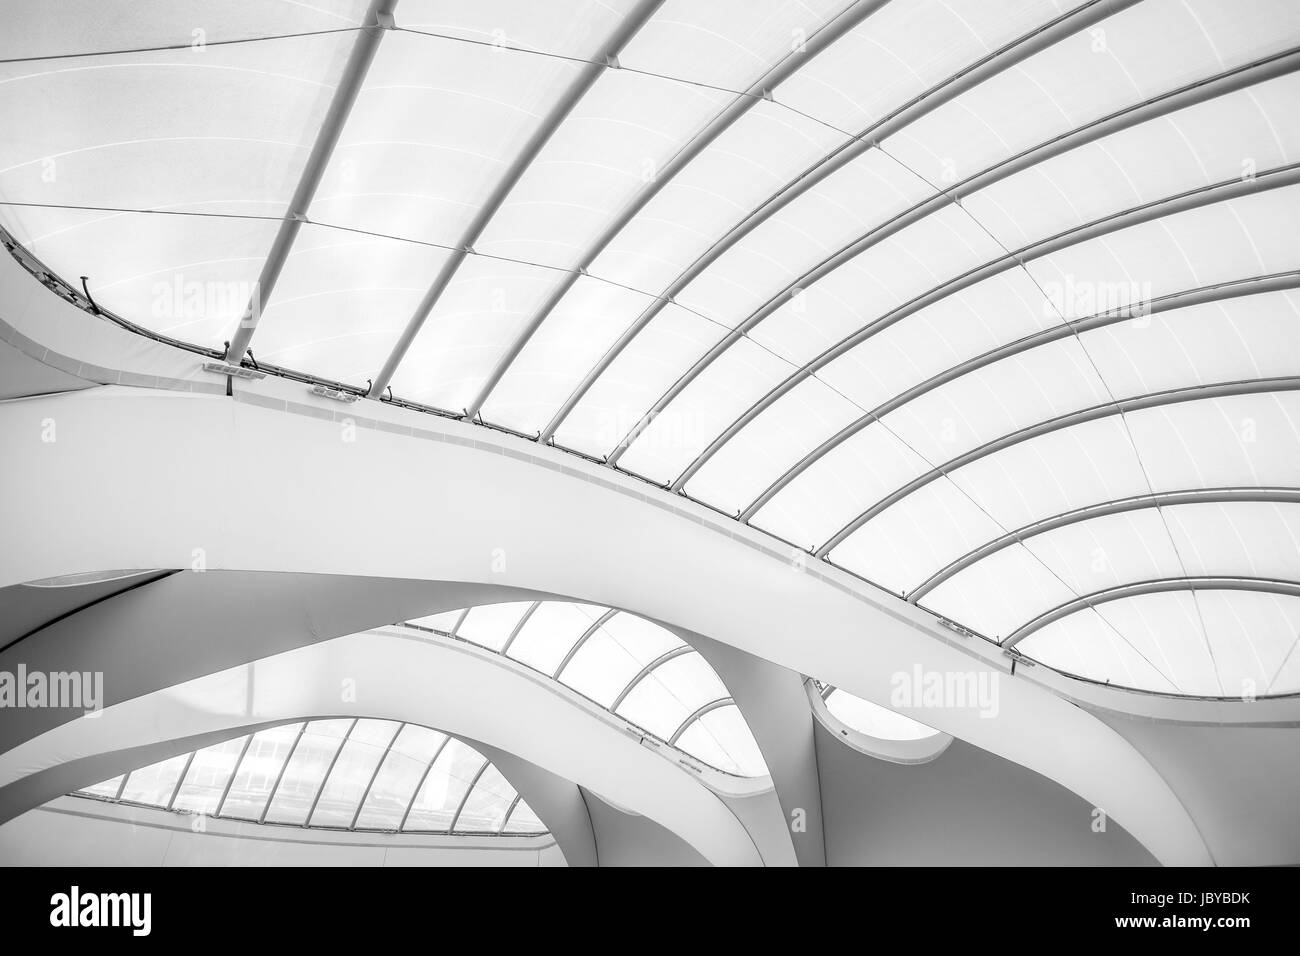 The stunning roof at the Grand Central Station Birmingham, UK Stock Photo